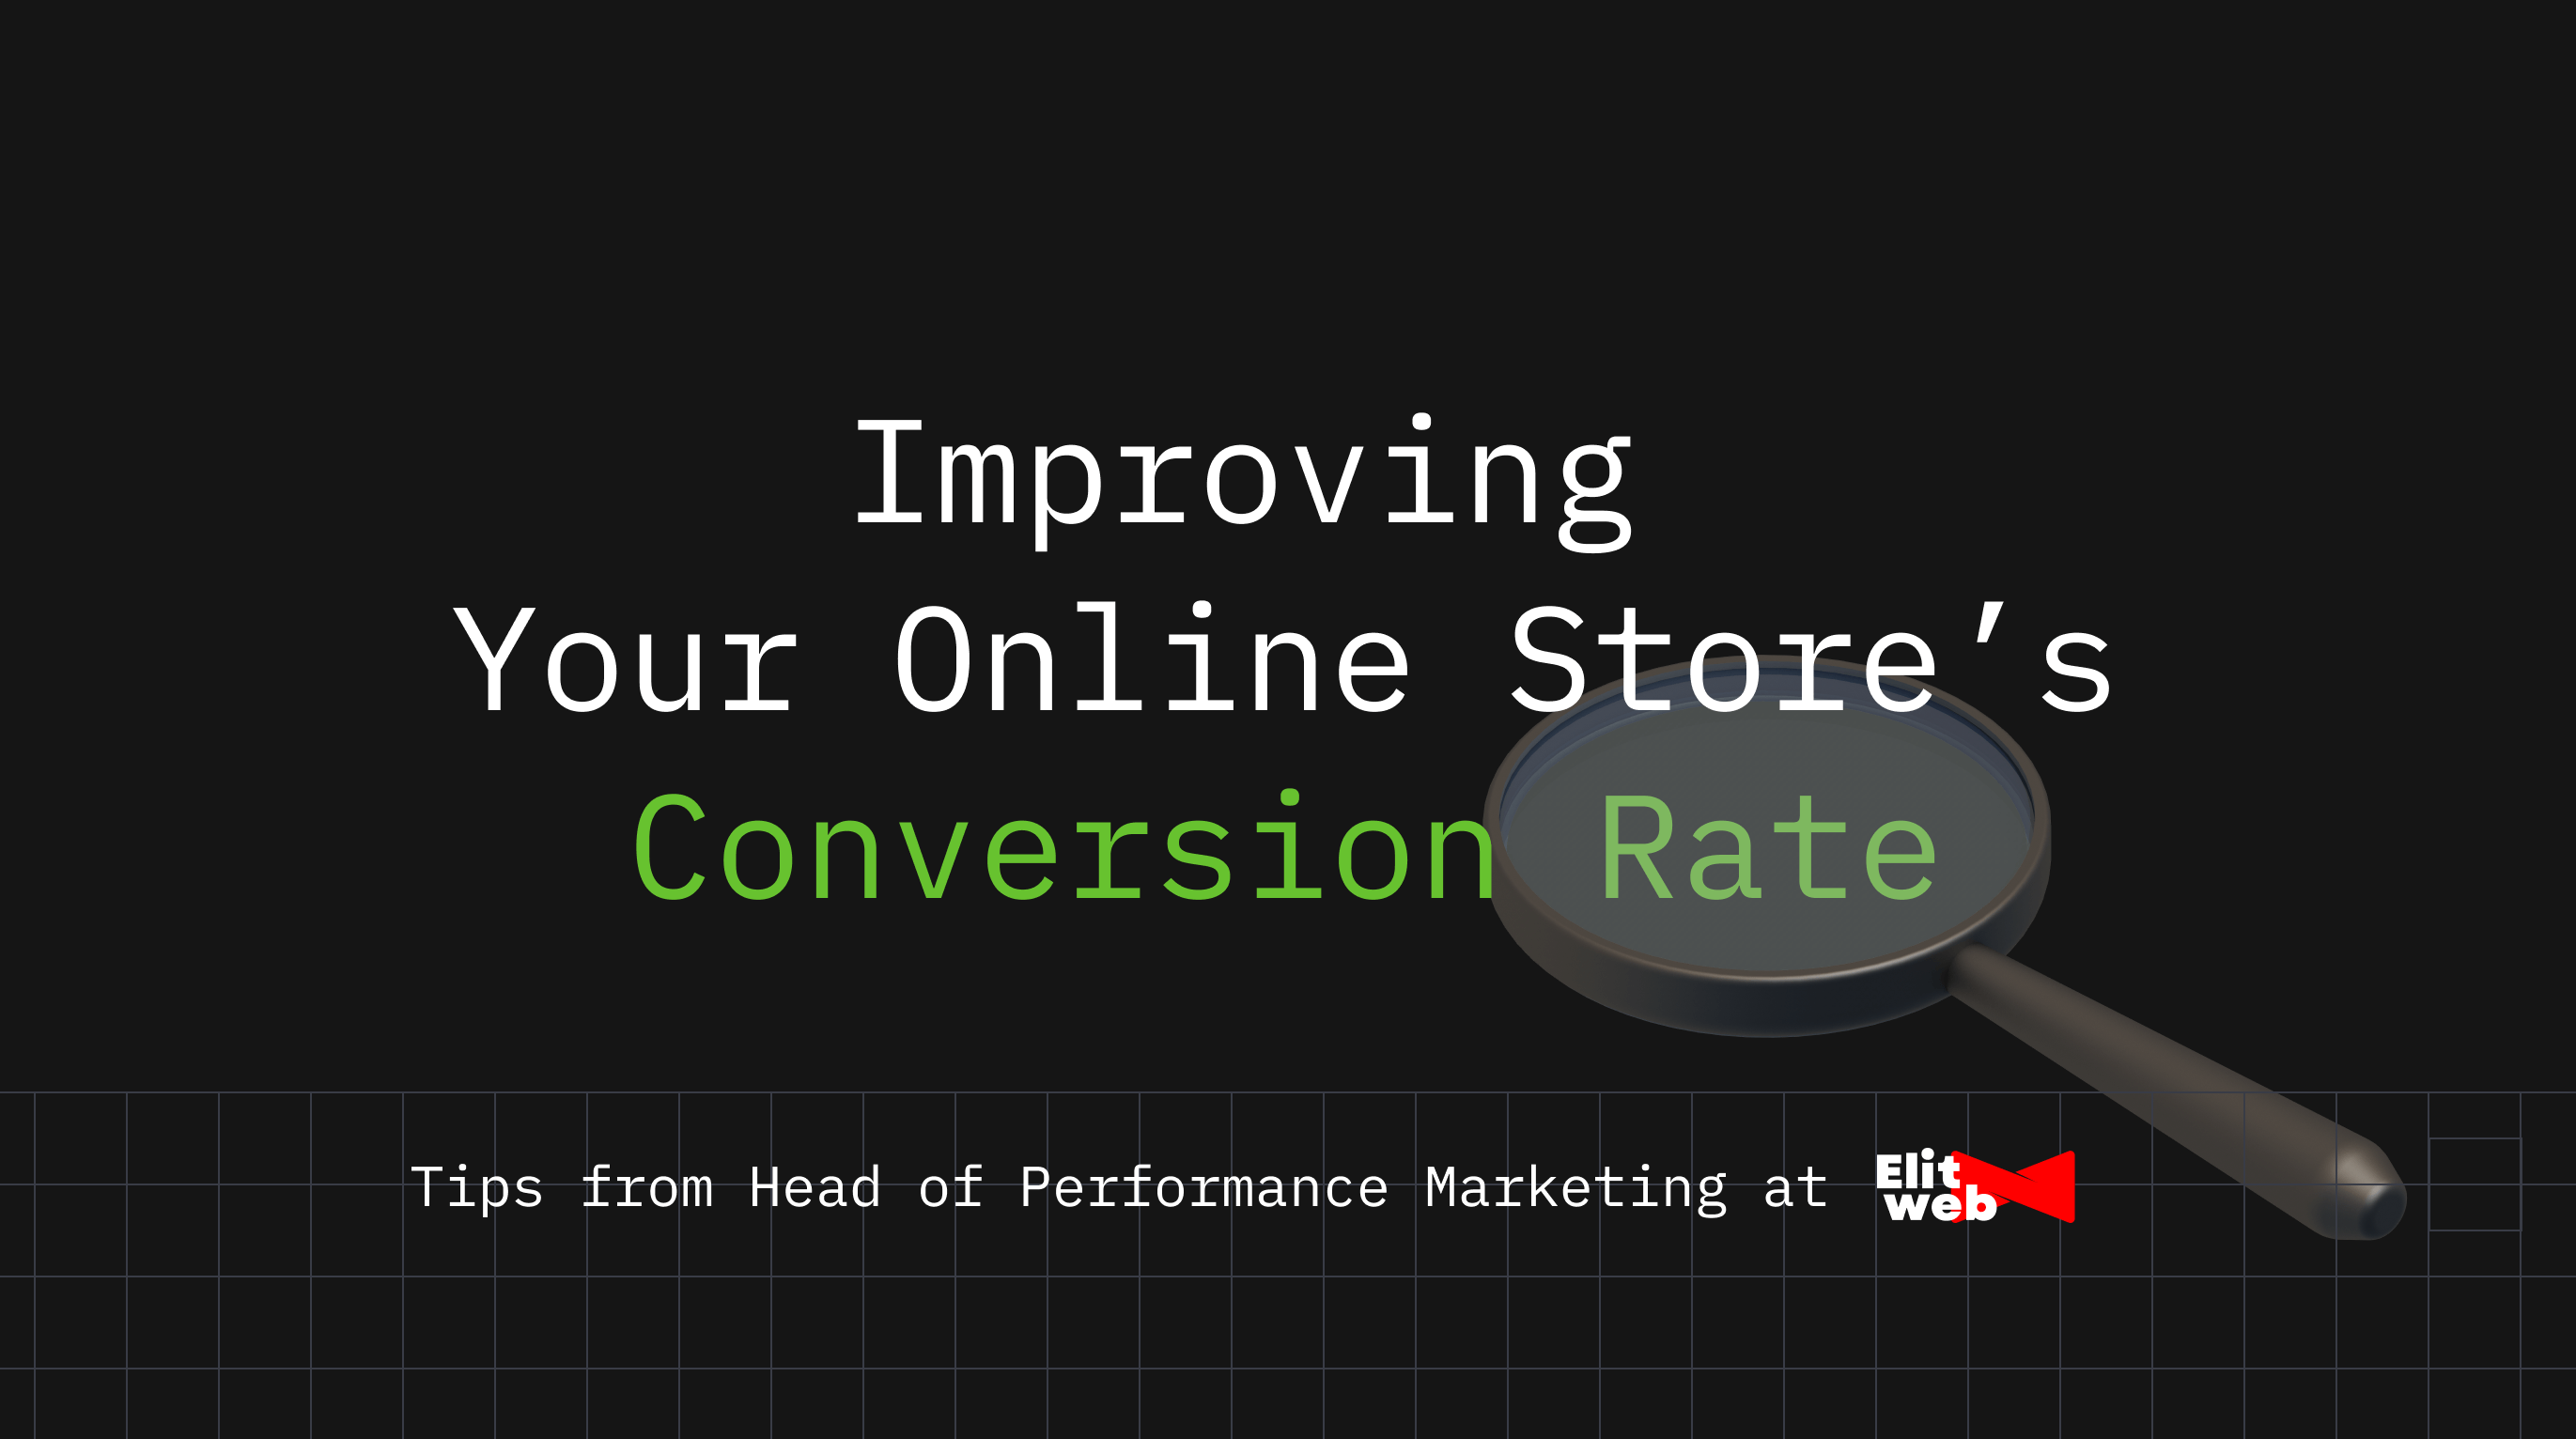 How to Boost the Conversion Rate of Online Store